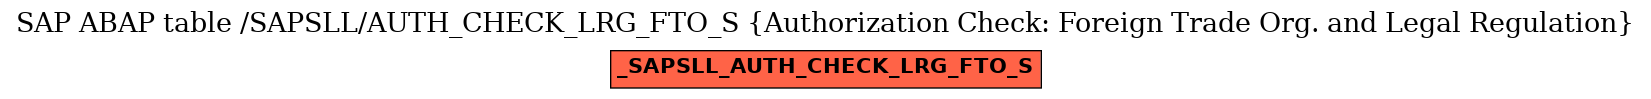 E-R Diagram for table /SAPSLL/AUTH_CHECK_LRG_FTO_S (Authorization Check: Foreign Trade Org. and Legal Regulation)